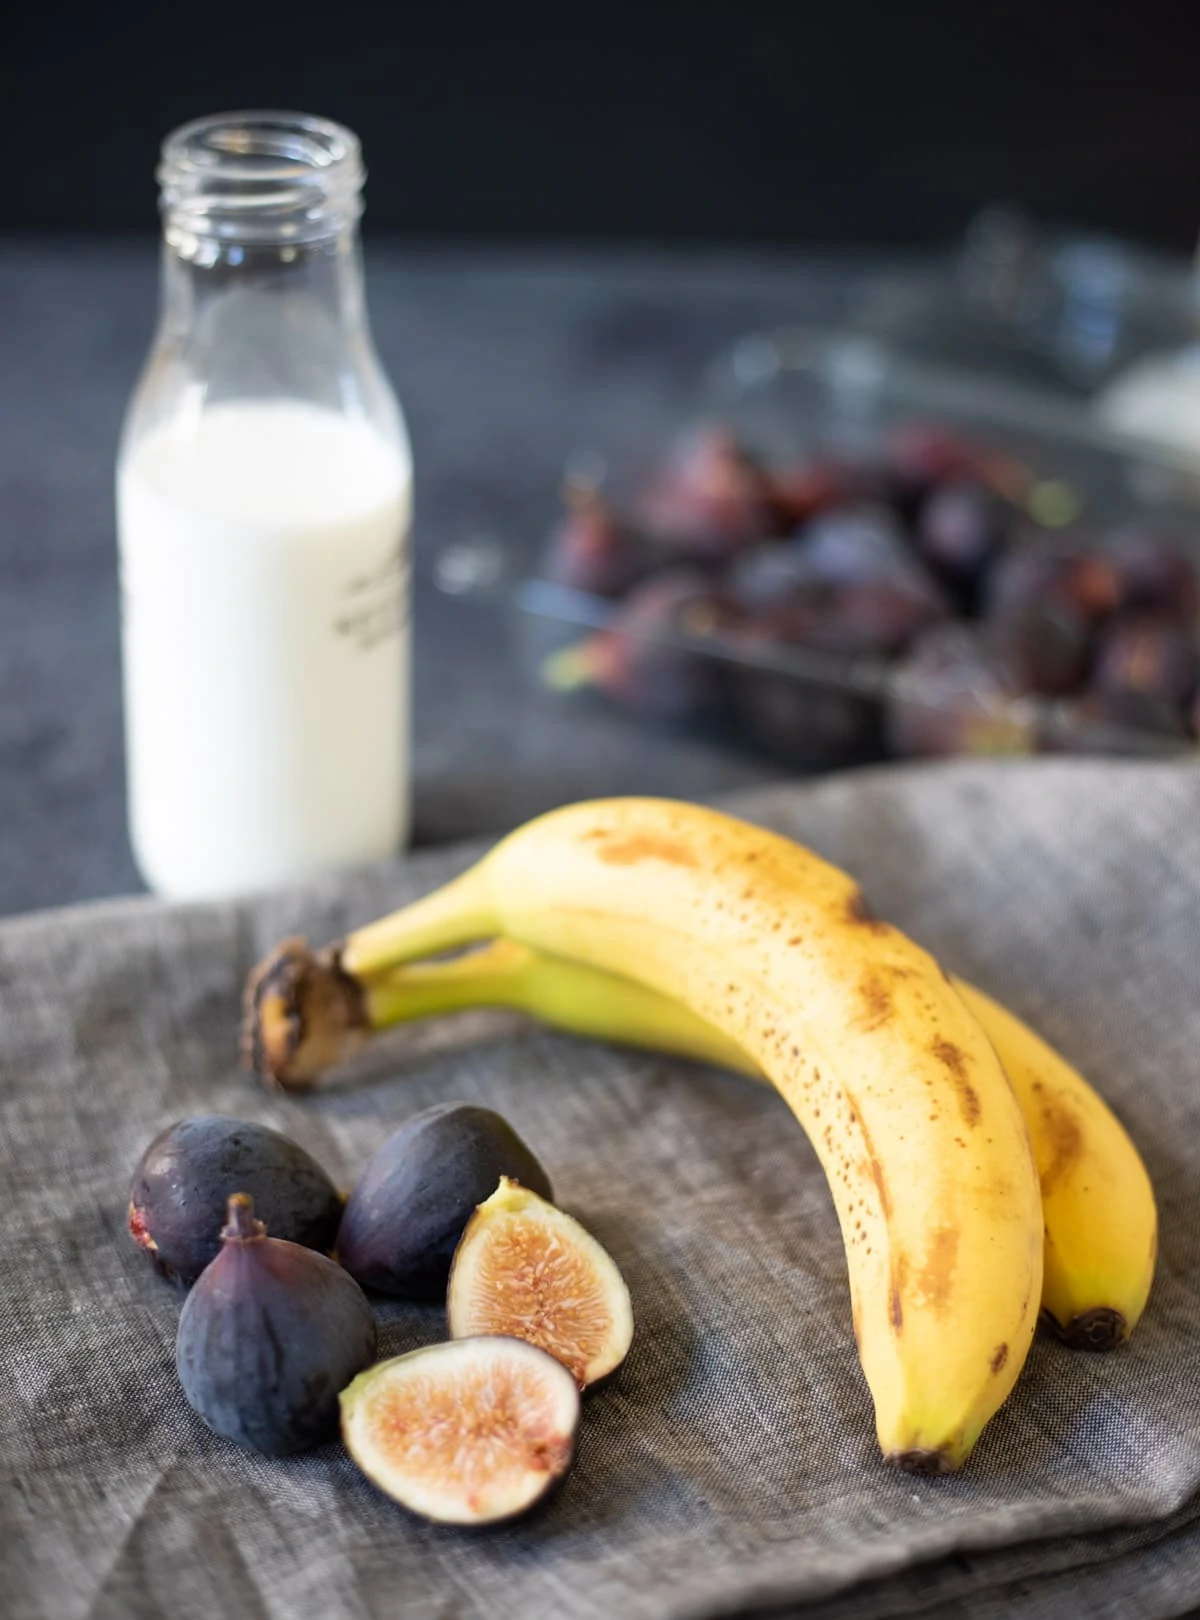 Ingredients such as figs, banana and milk 